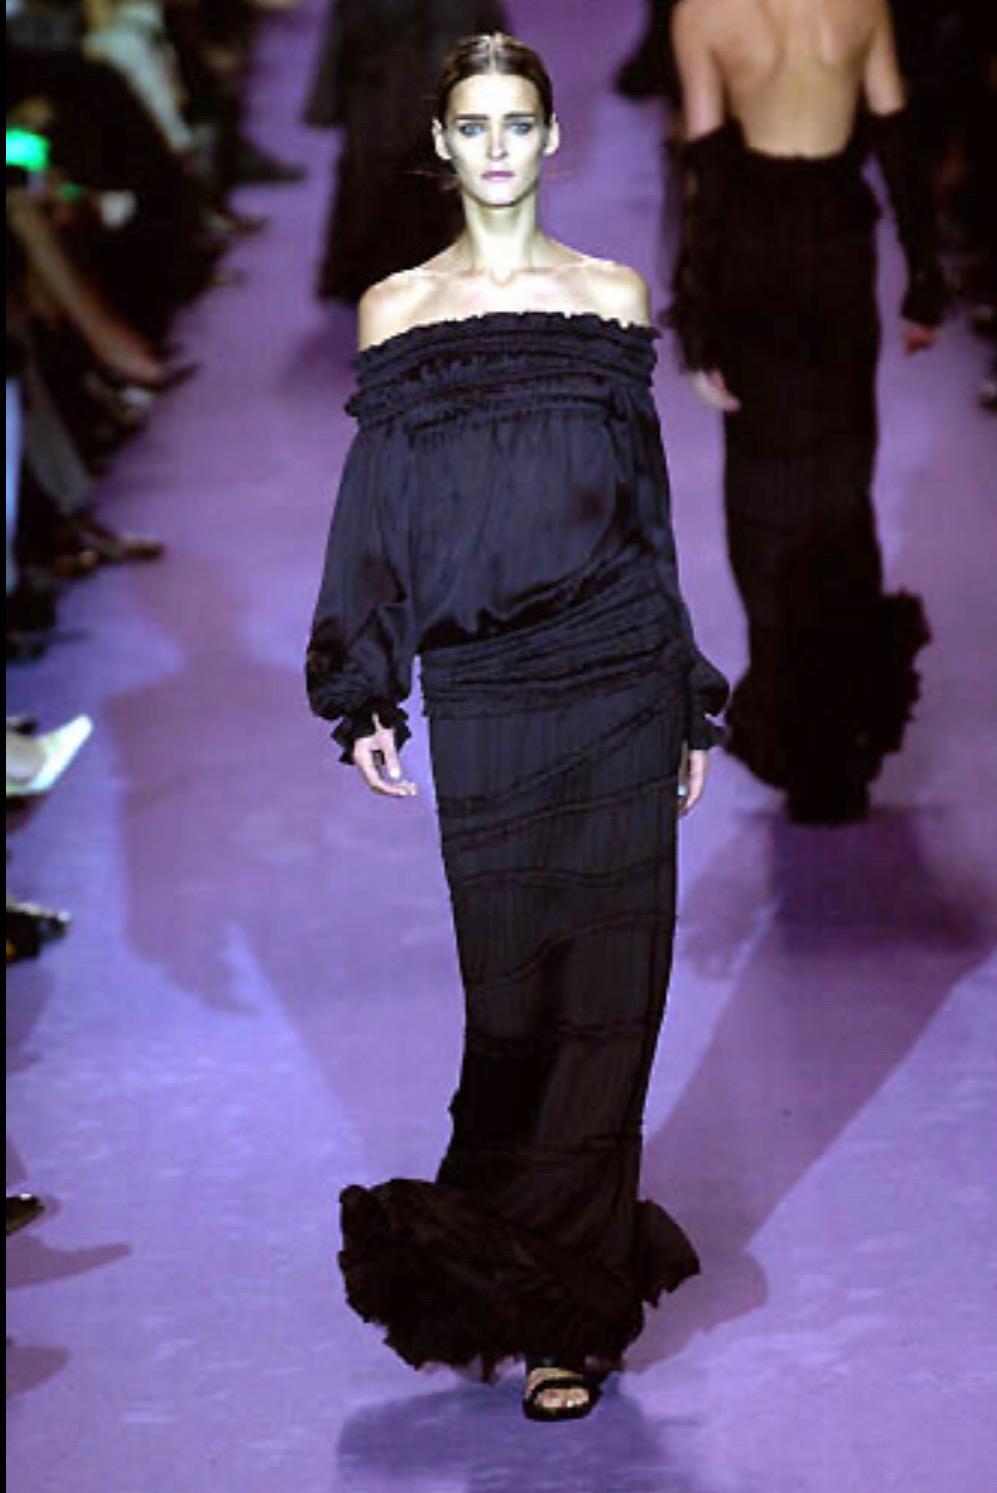 Presenting a fabulous black pheasant-style Yves Saint Laurent Rive Gauche top, designed by Tom Ford. From the Fall/Winter 2001 collection, this top debuted as part of Look 20, modeled by Caroline Ribeiro, and was also highlighted in the season's ad